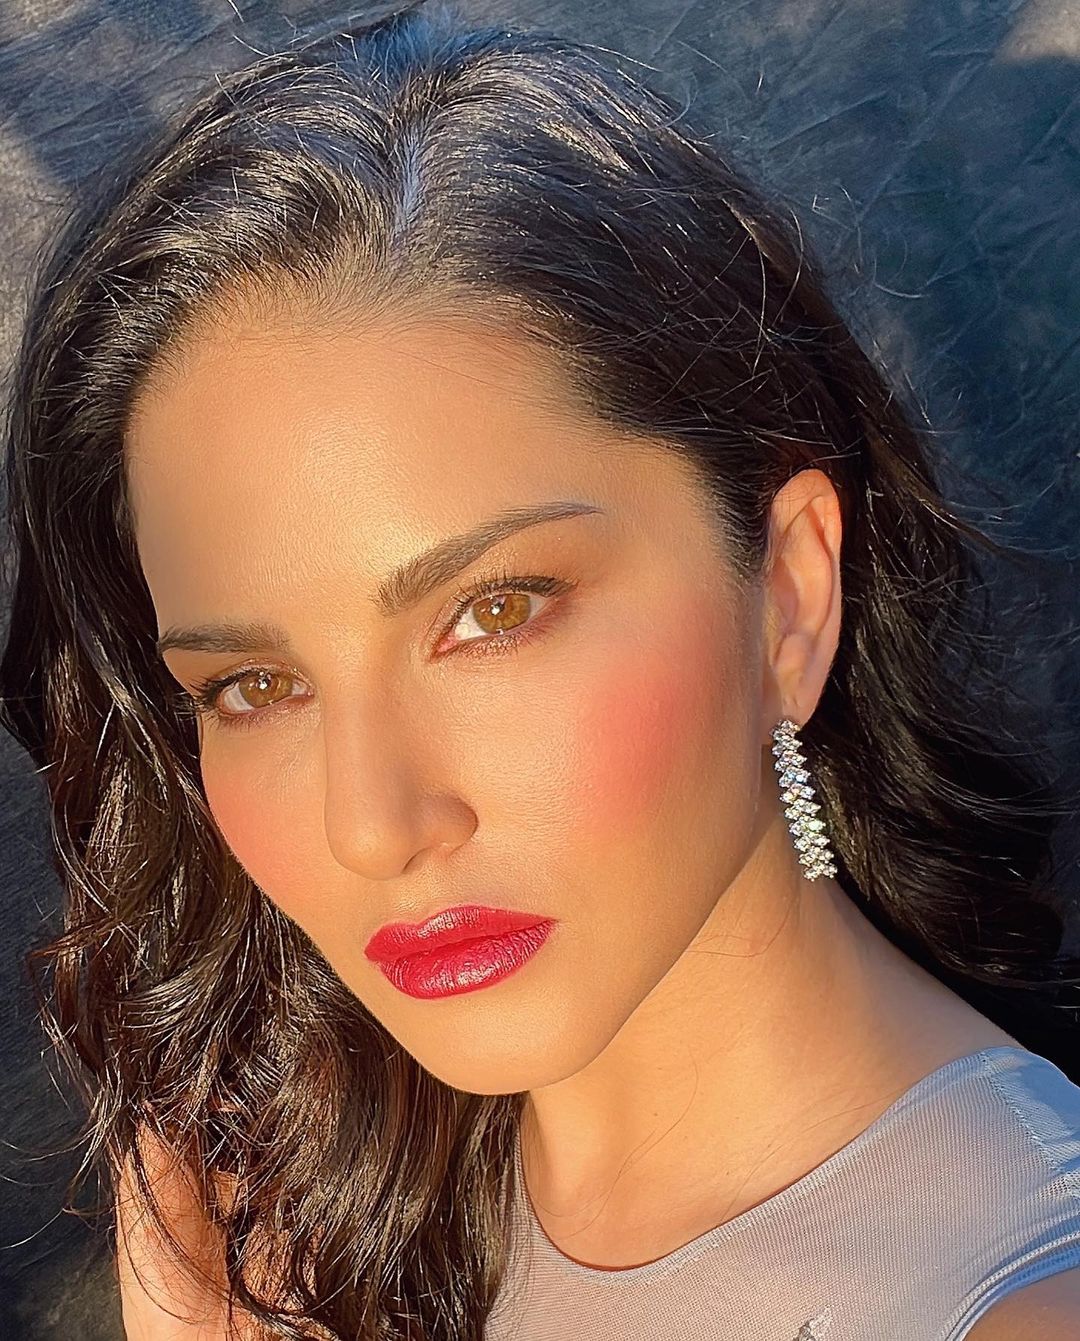 Sunny Leone looks sizzling with the red lips and blush cheeks